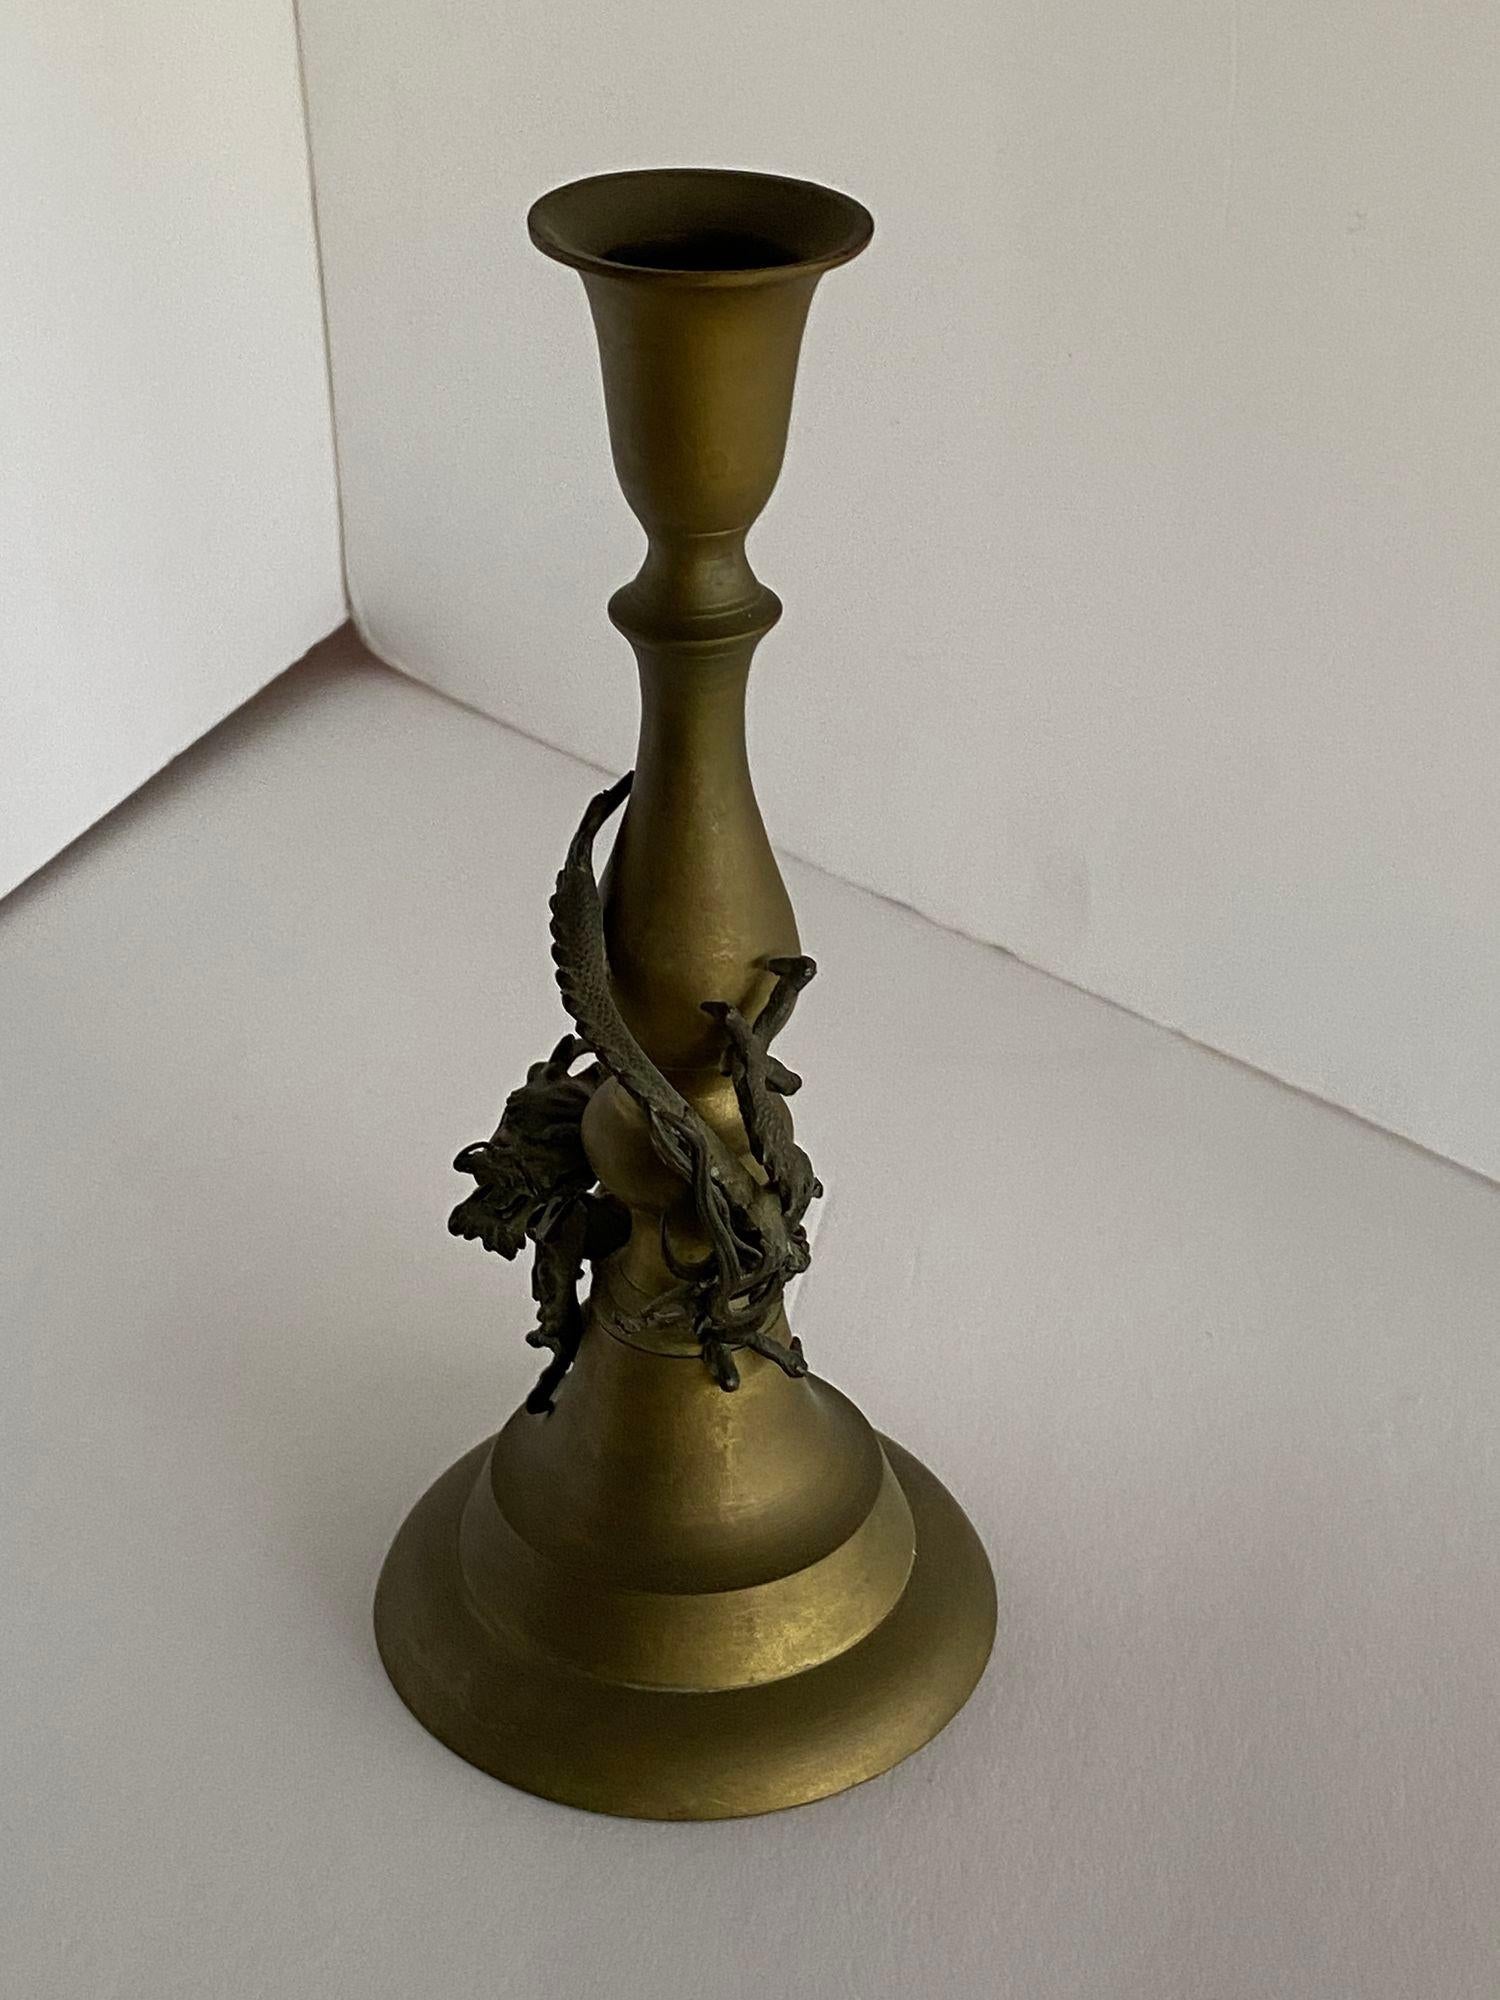 Hand Casted Brass Candlestick Holder w/ Chinese Dragon, Circa 1920 In Excellent Condition For Sale In Van Nuys, CA